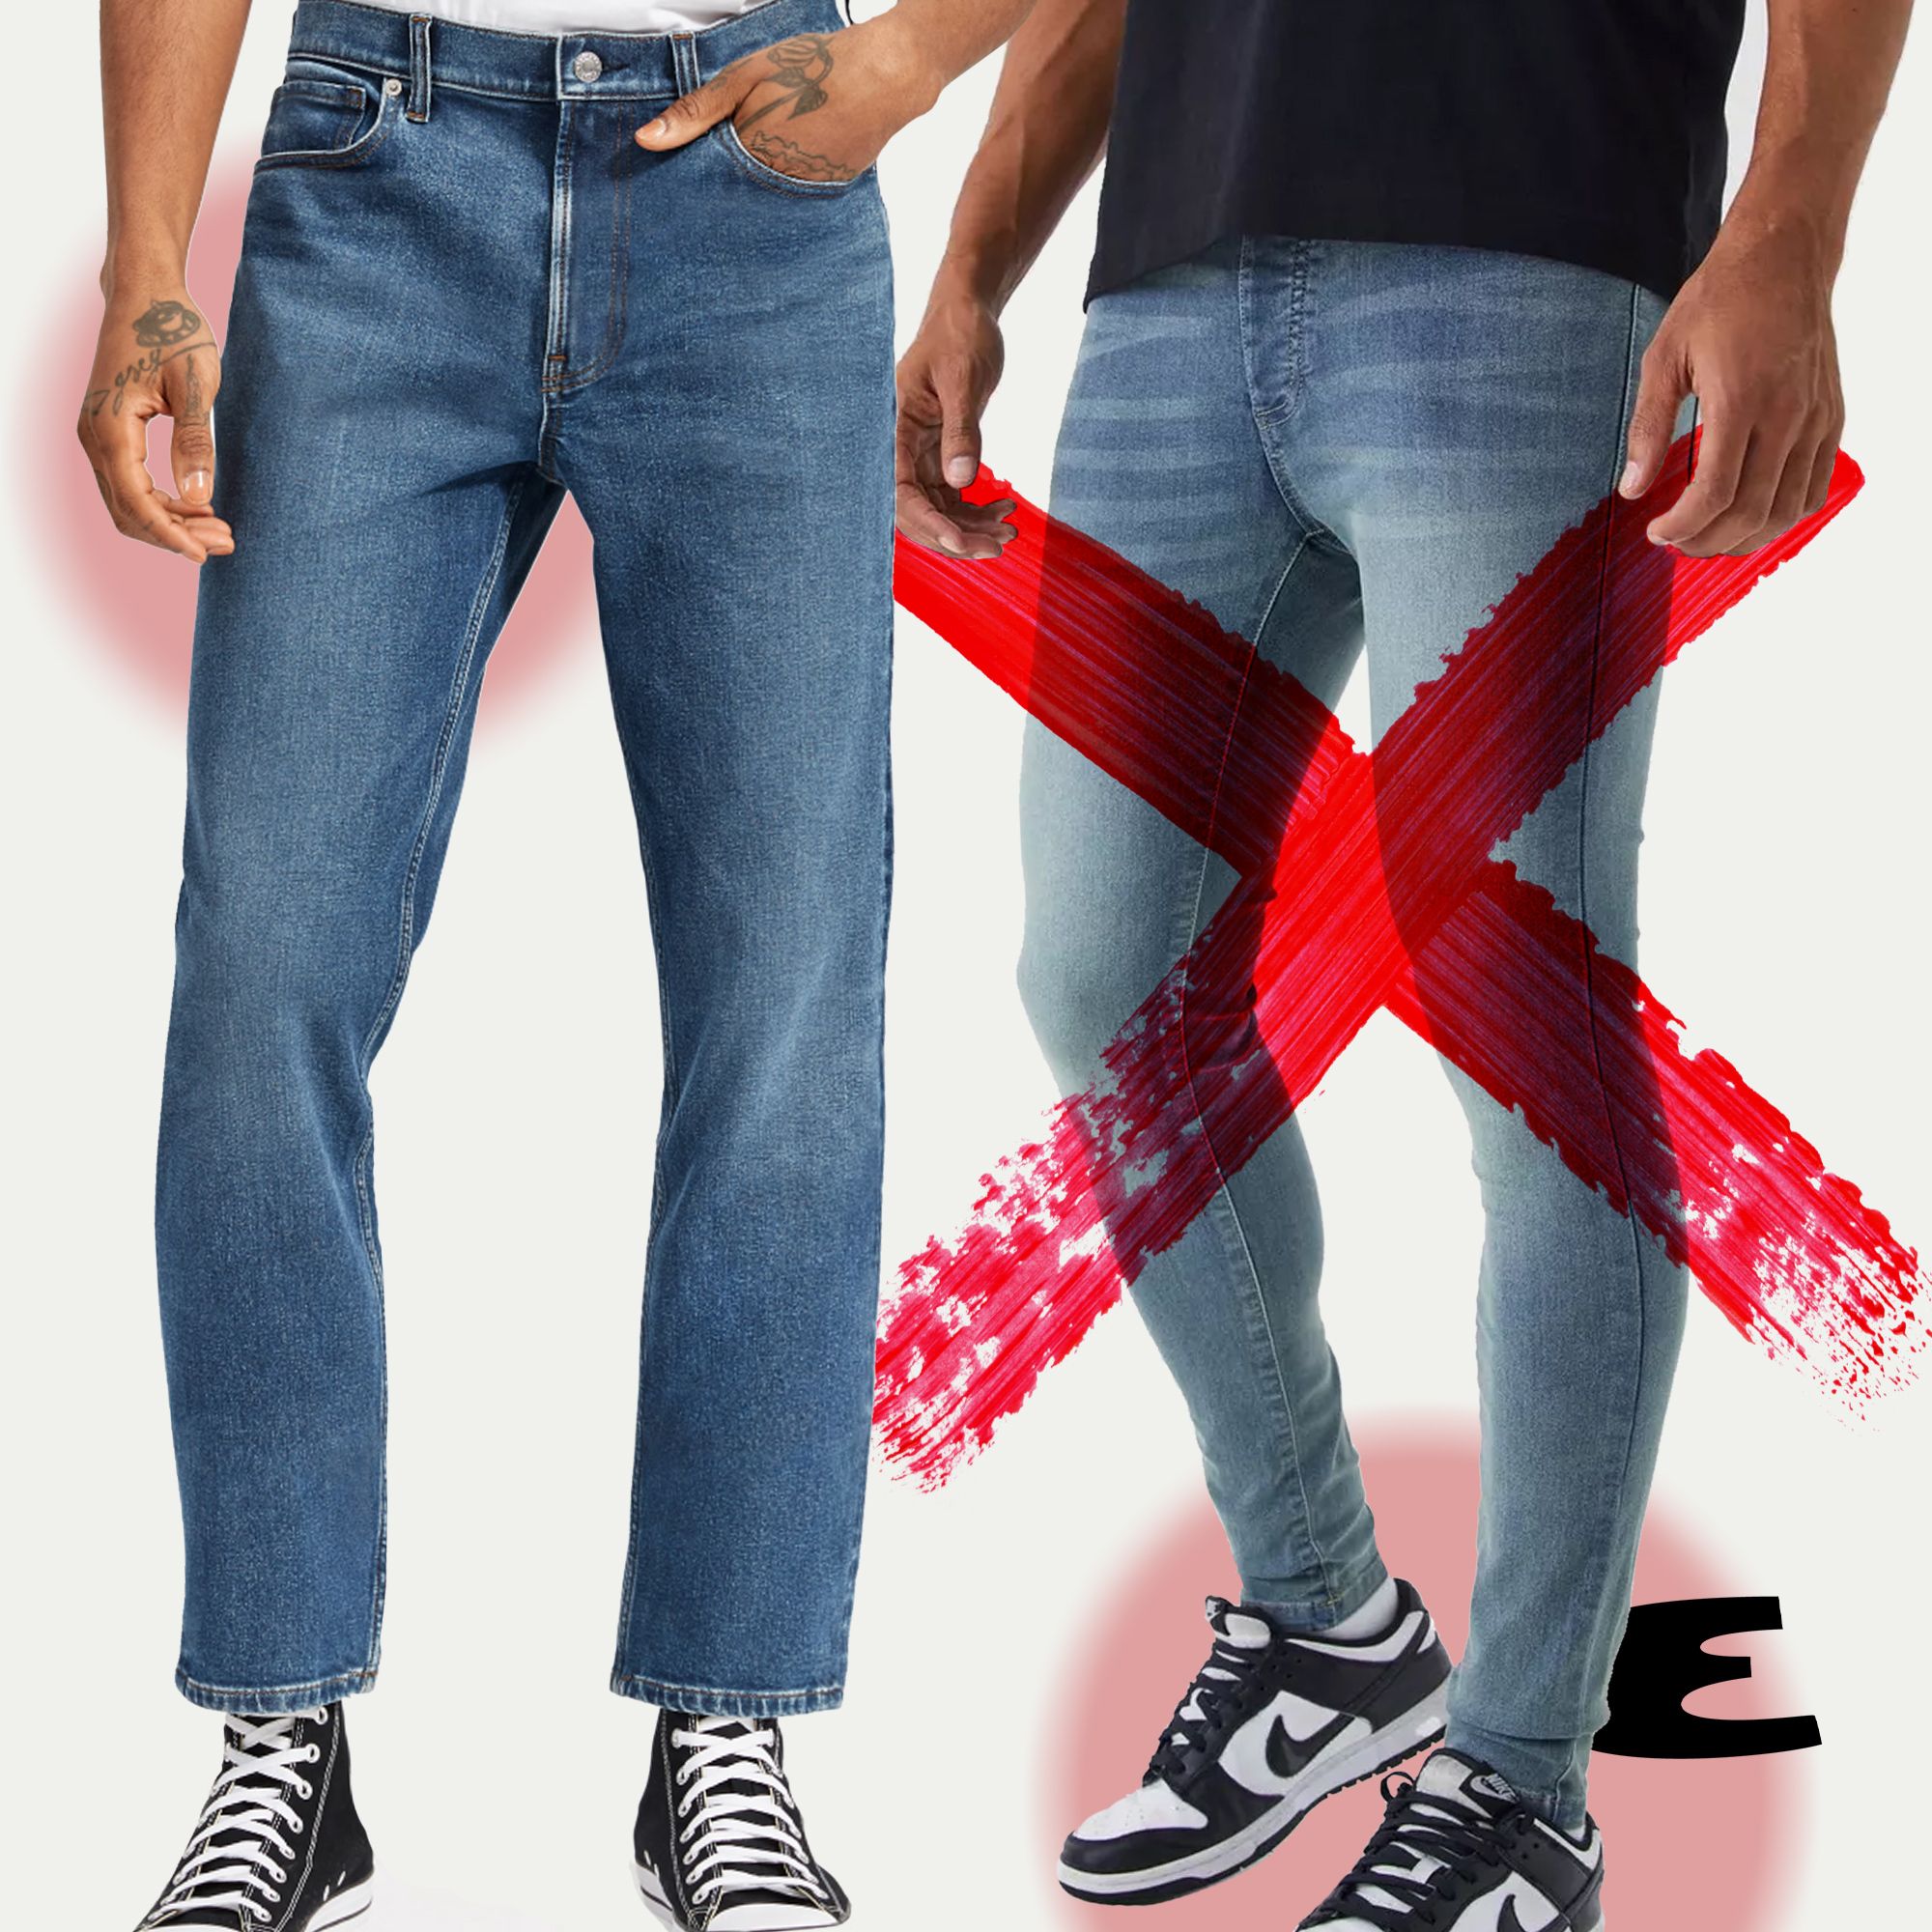 This Might Be the Best Argument Yet for Abandoning Your Skinny Jeans